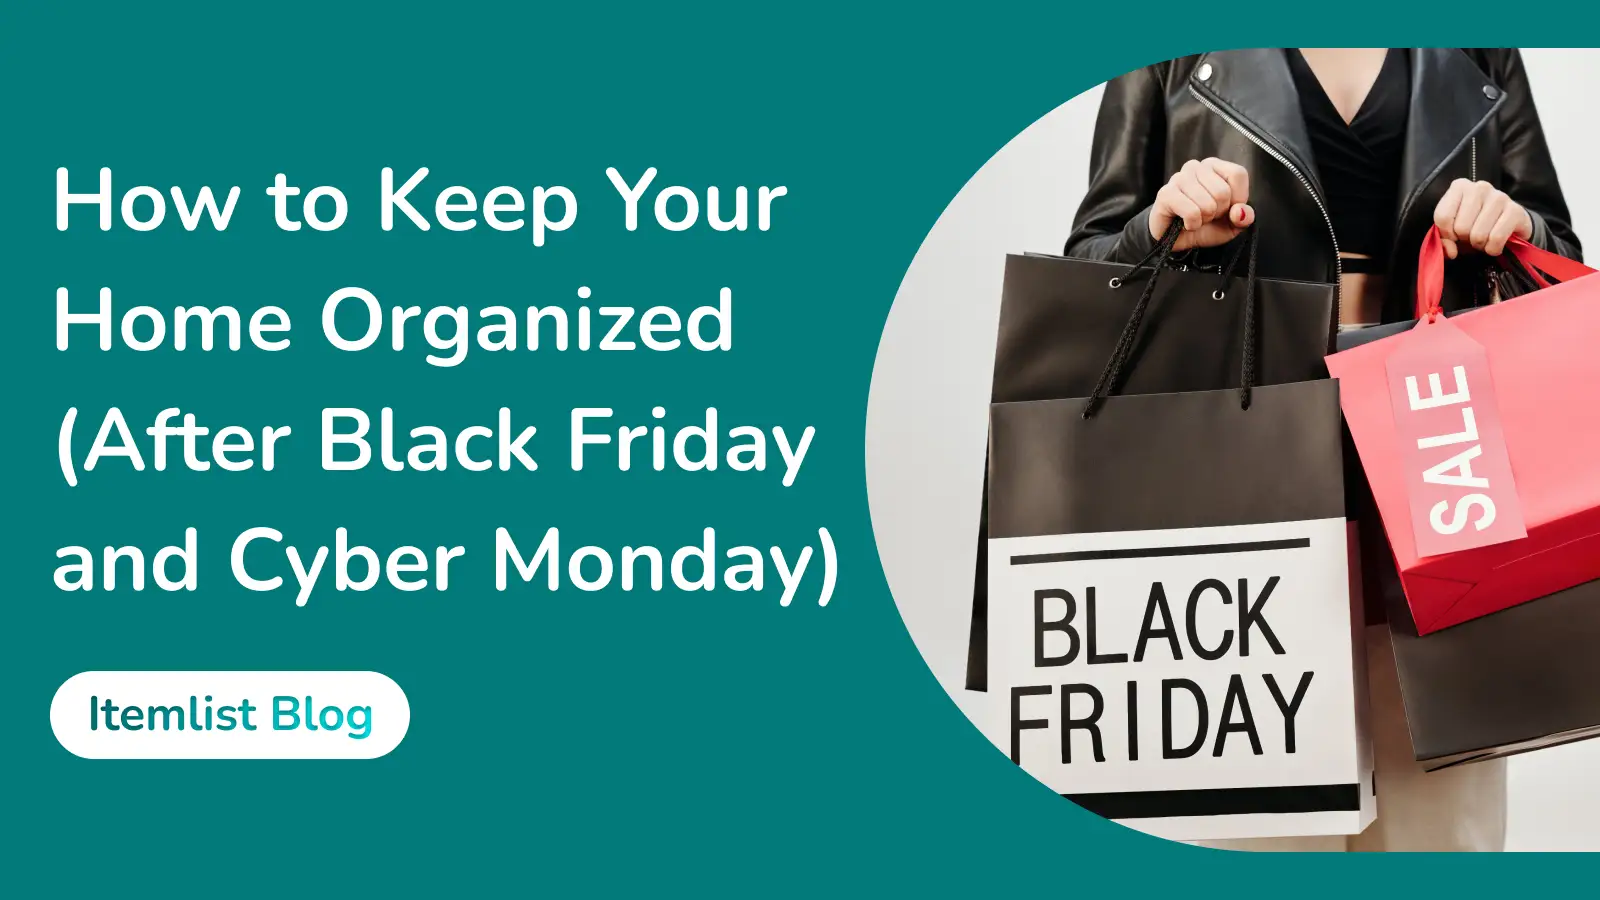 How to Keep Your Home Organized (After Black Friday and Cyber Monday)